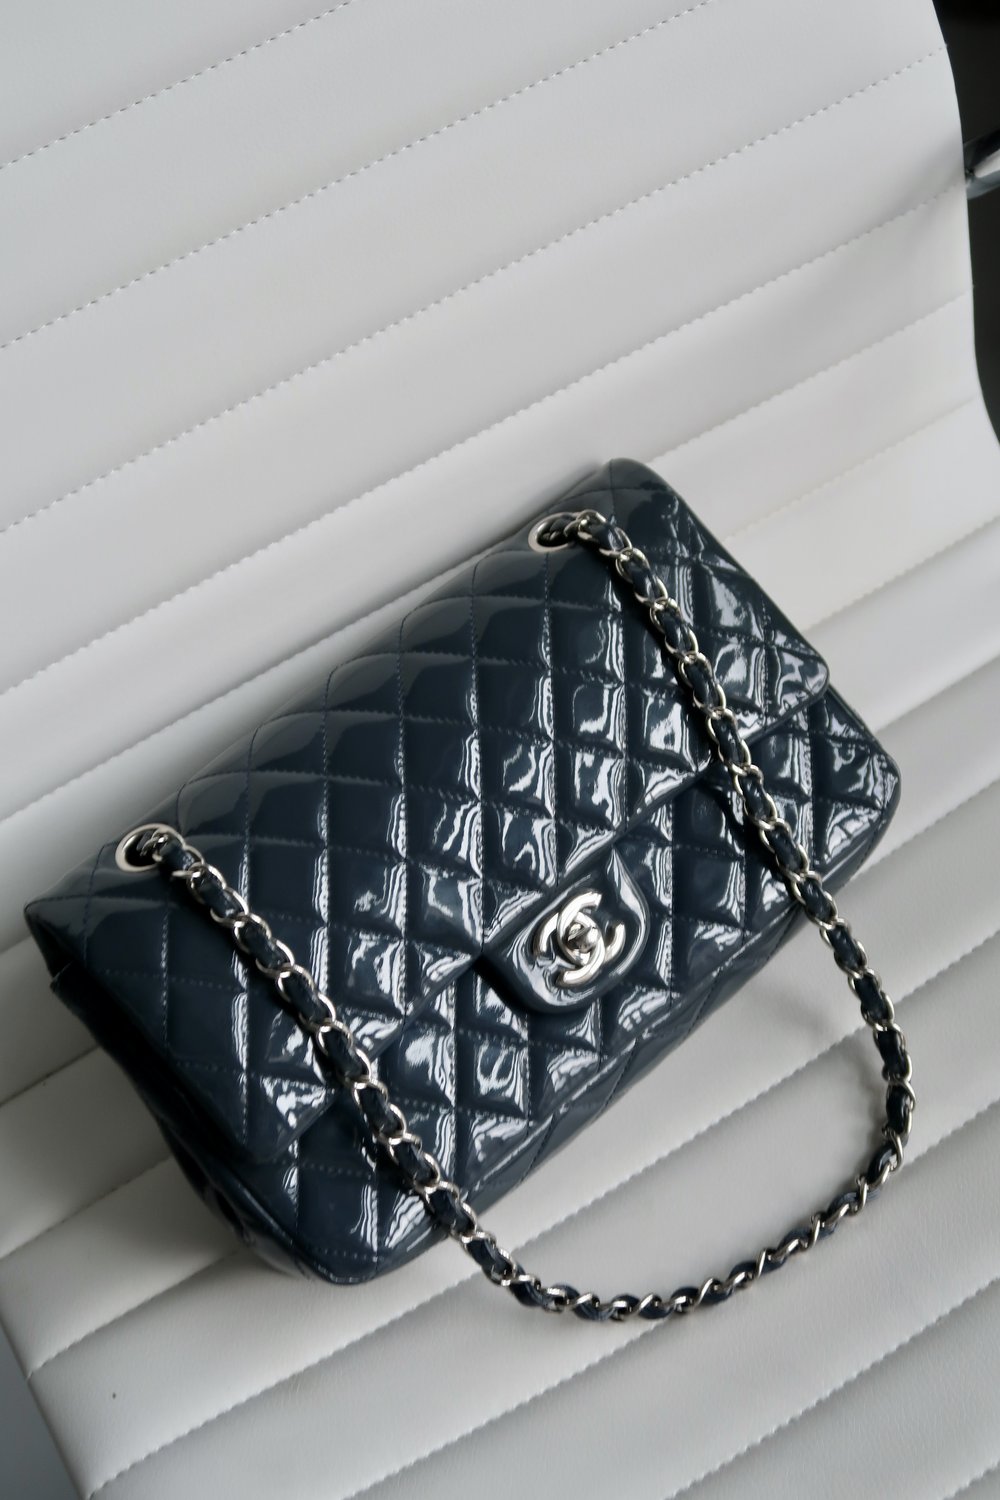 Chanel Dark Navy Patent Classic Flap Bag — Blaise Ruby Loves